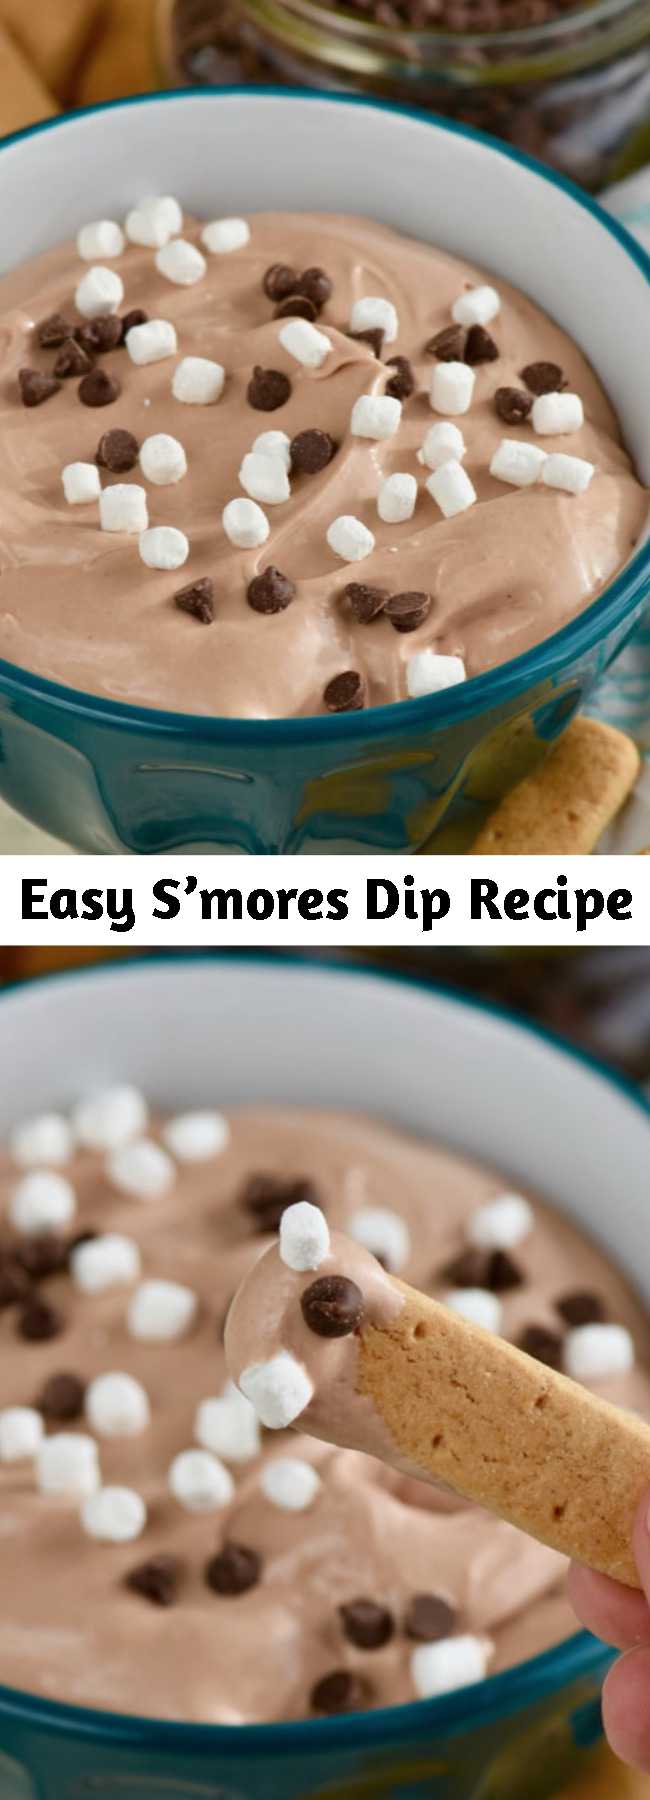 Easy S’mores Dip Recipe - You can't get much simpler and more delicious than this Easy S'mores Dip. It's the perfect appetizer for parties and it's so easy even the kids can make it. #smores